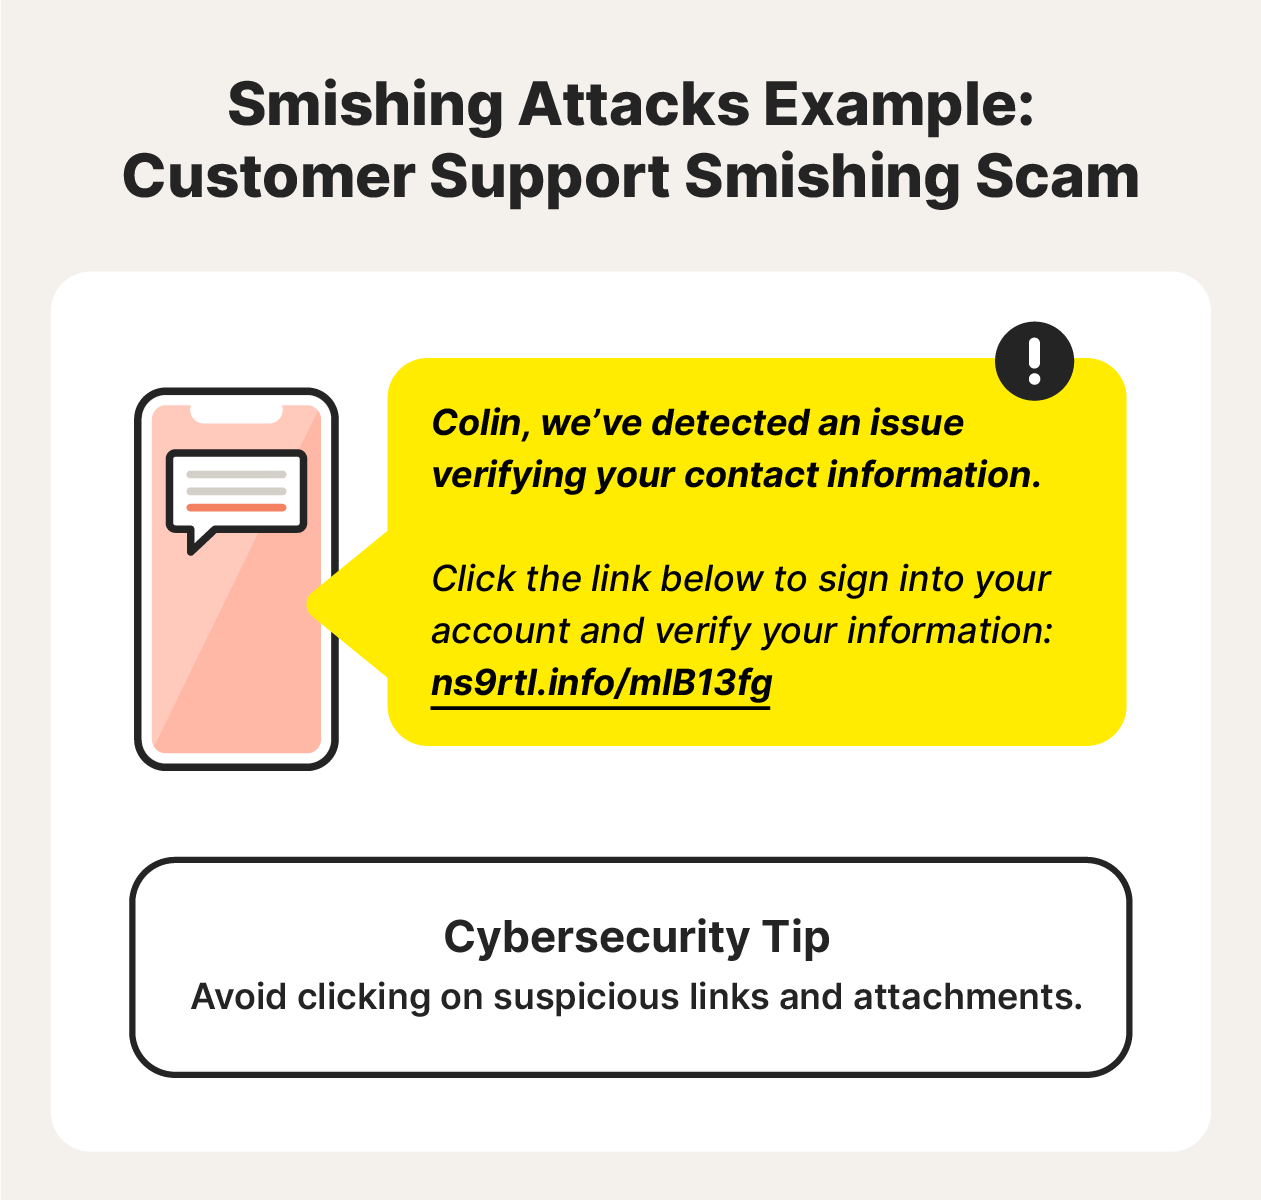 The customer support smishing scam is a popular smishing attack.